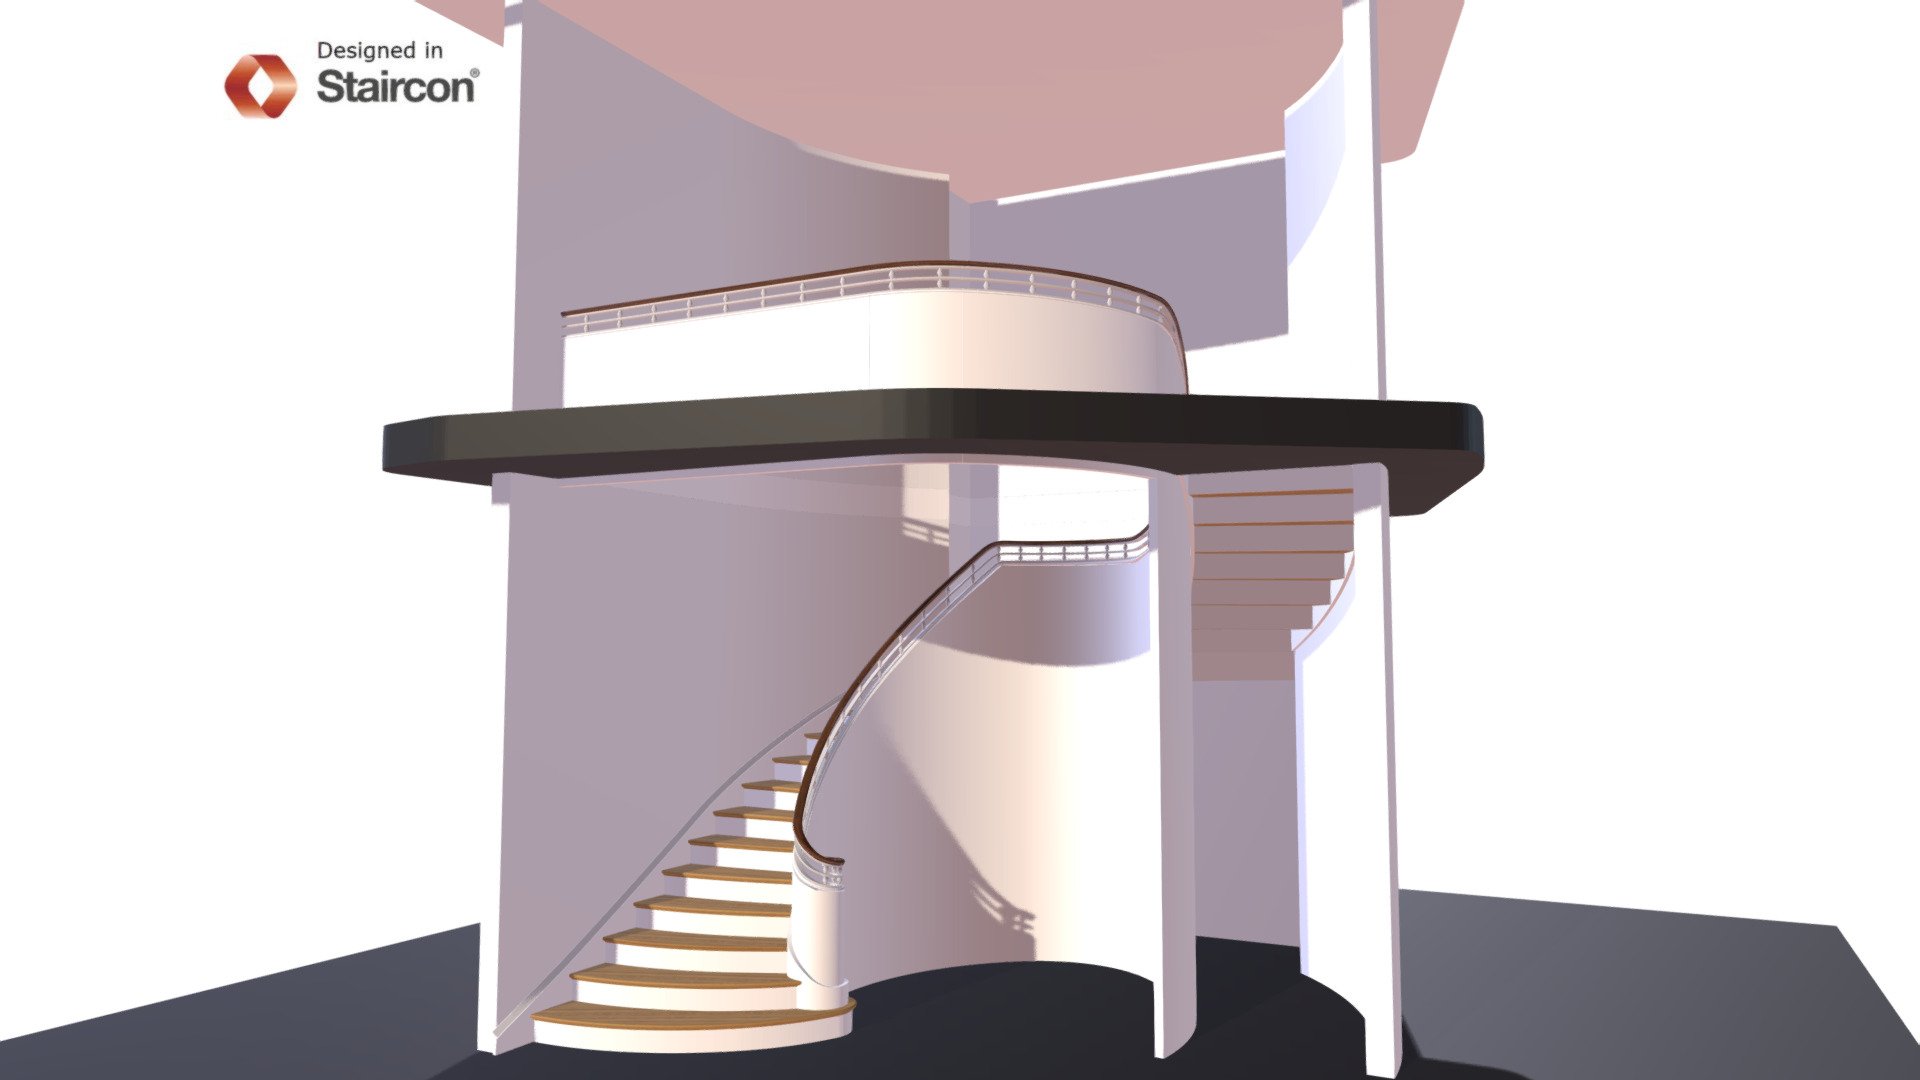 Diamond Stair Balustrade Walnut Handrail - 3D model by 3D Software for Stair Design and Production (@Staircon_examples_3Dexport) 3d model